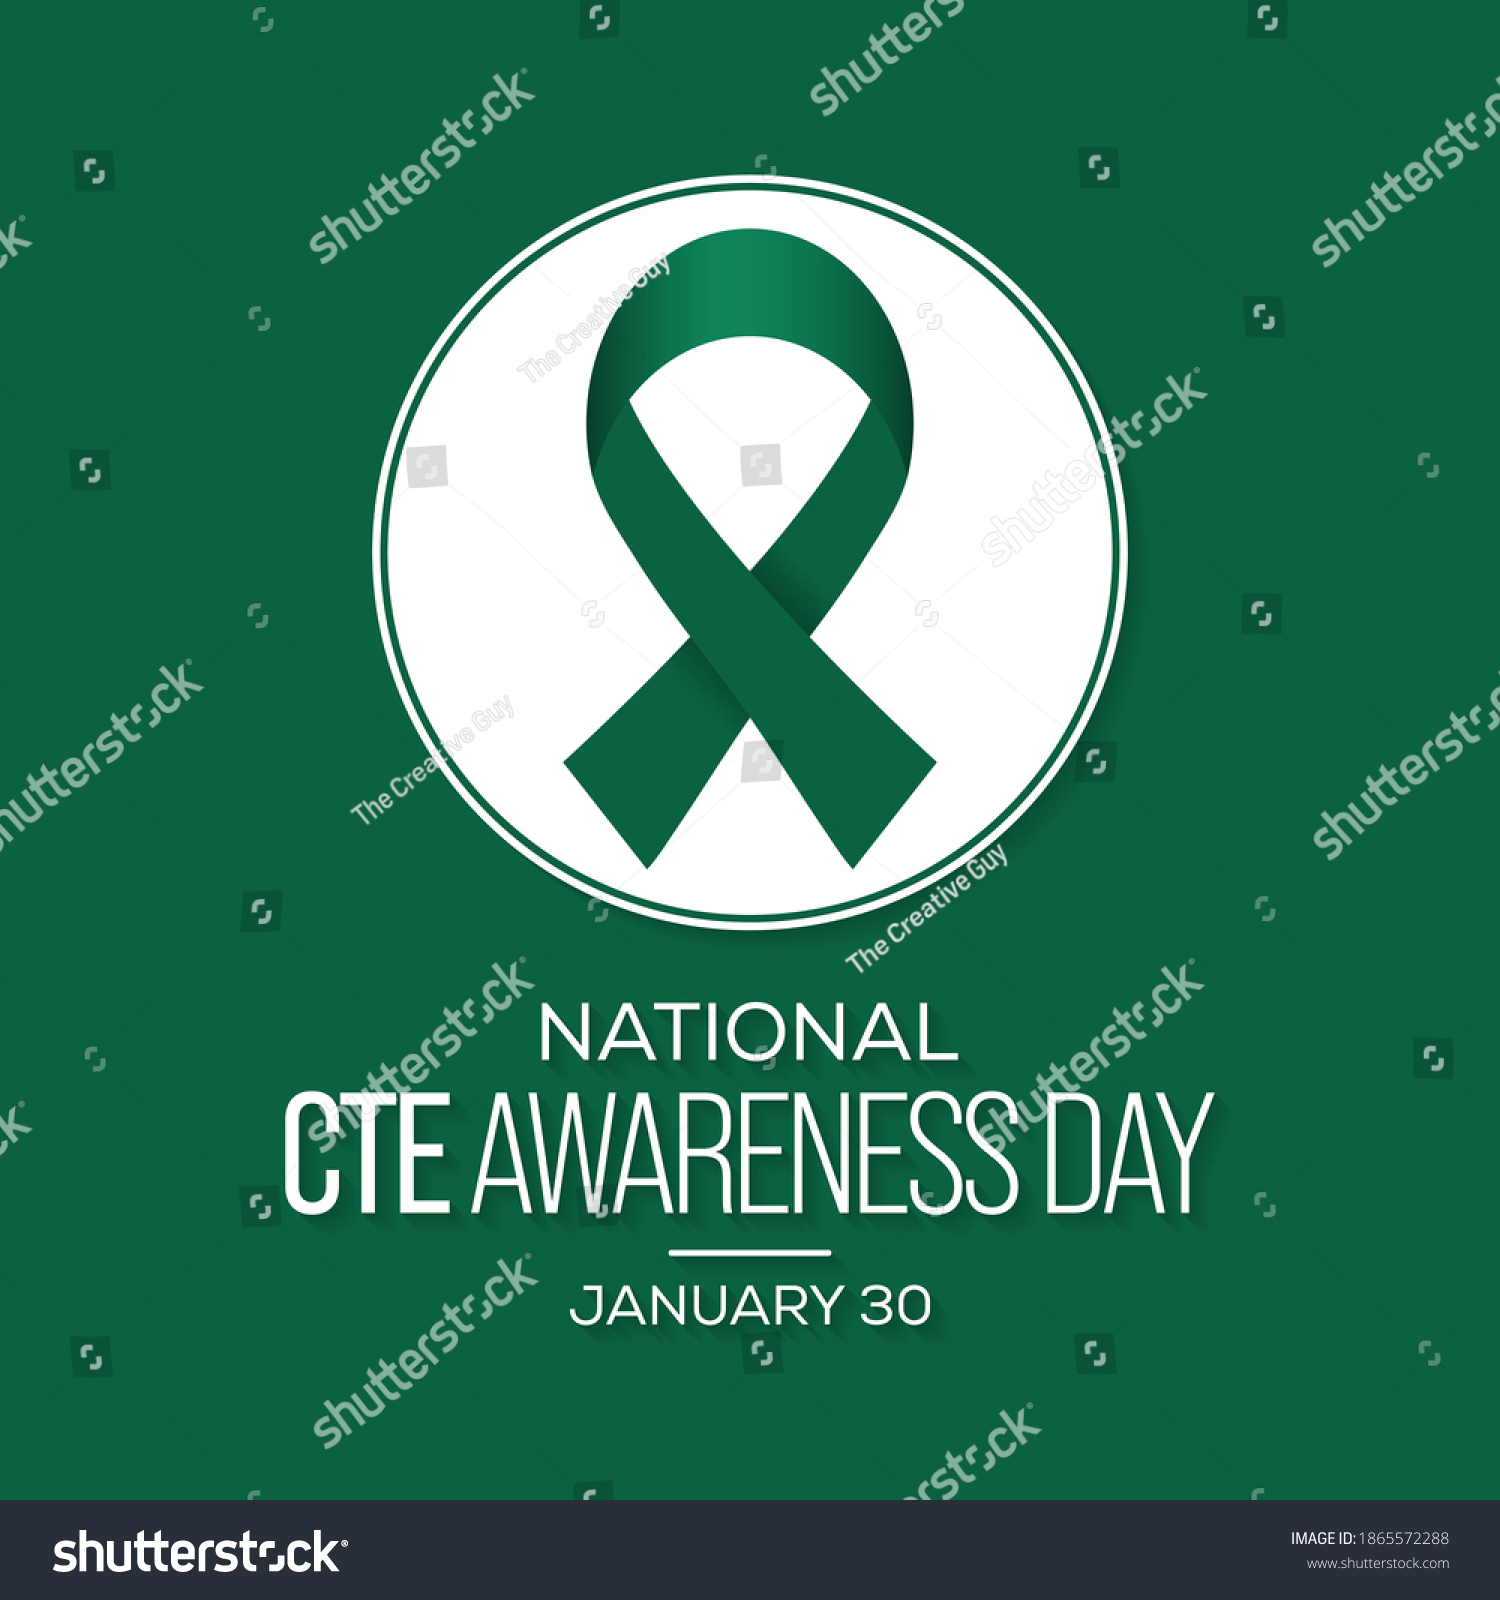 SVG of Vector illustration on the theme of National chronic traumatic encephalopathy (CTE) awareness day observed each year on January 30th. svg